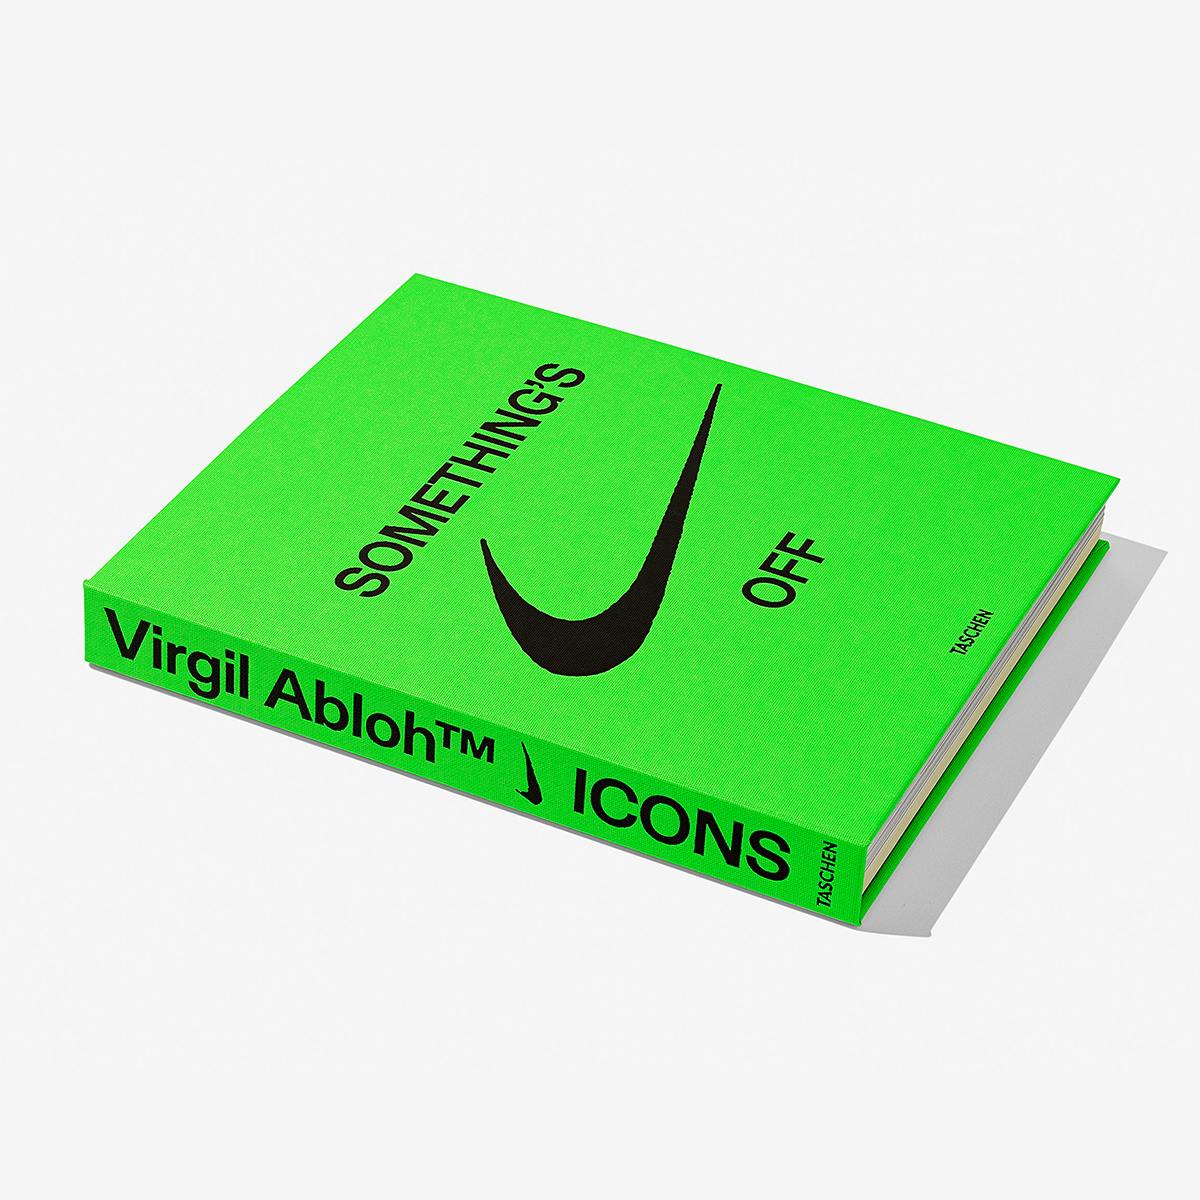 A new book is Virgil Abloh's partnership with